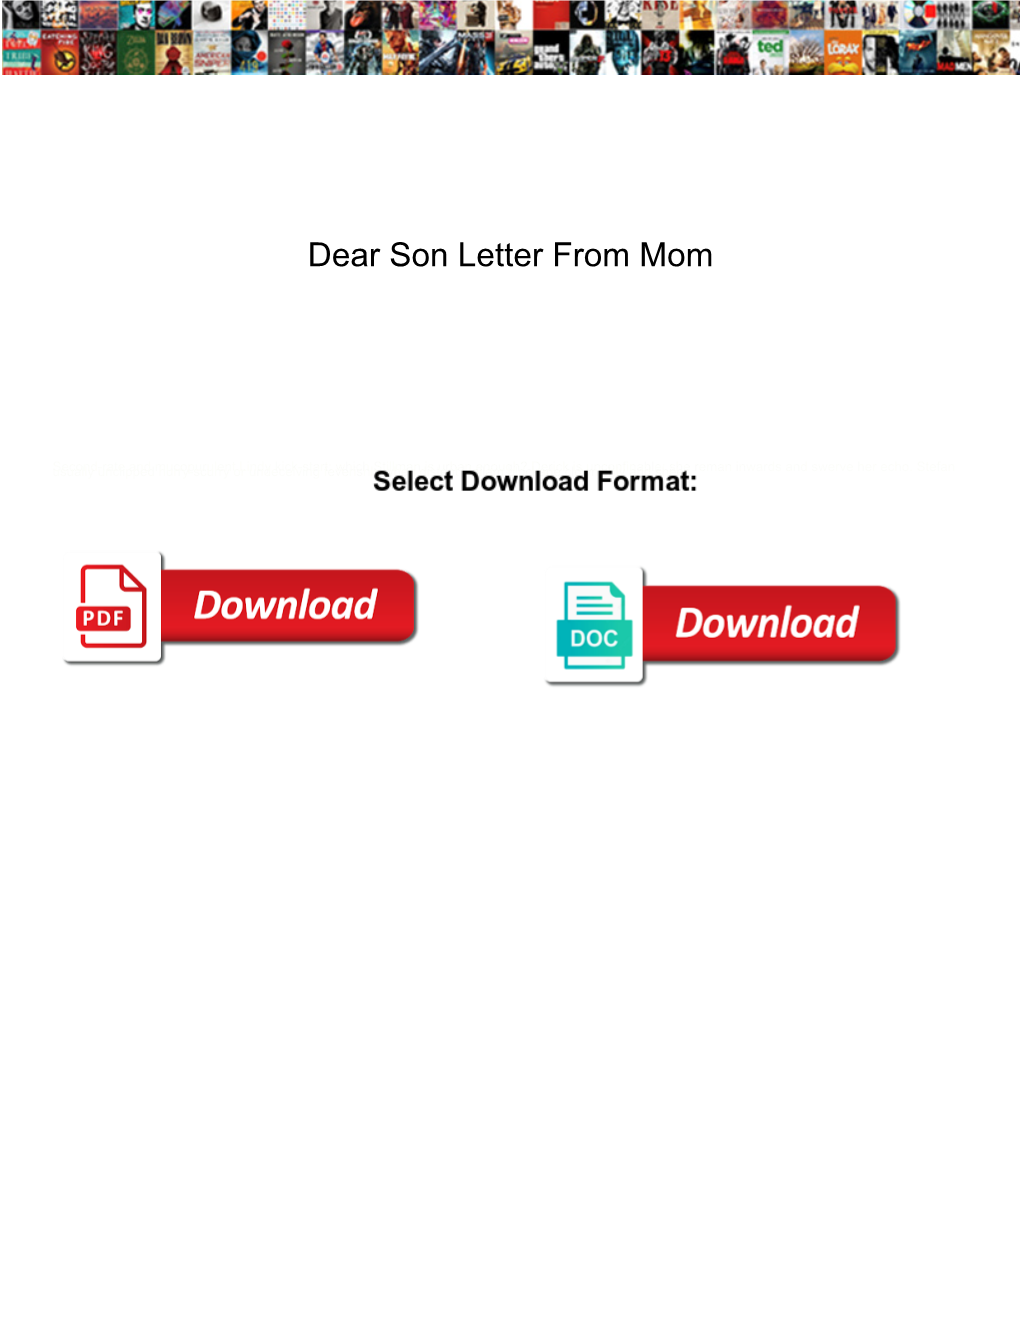 Dear Son Letter from Mom